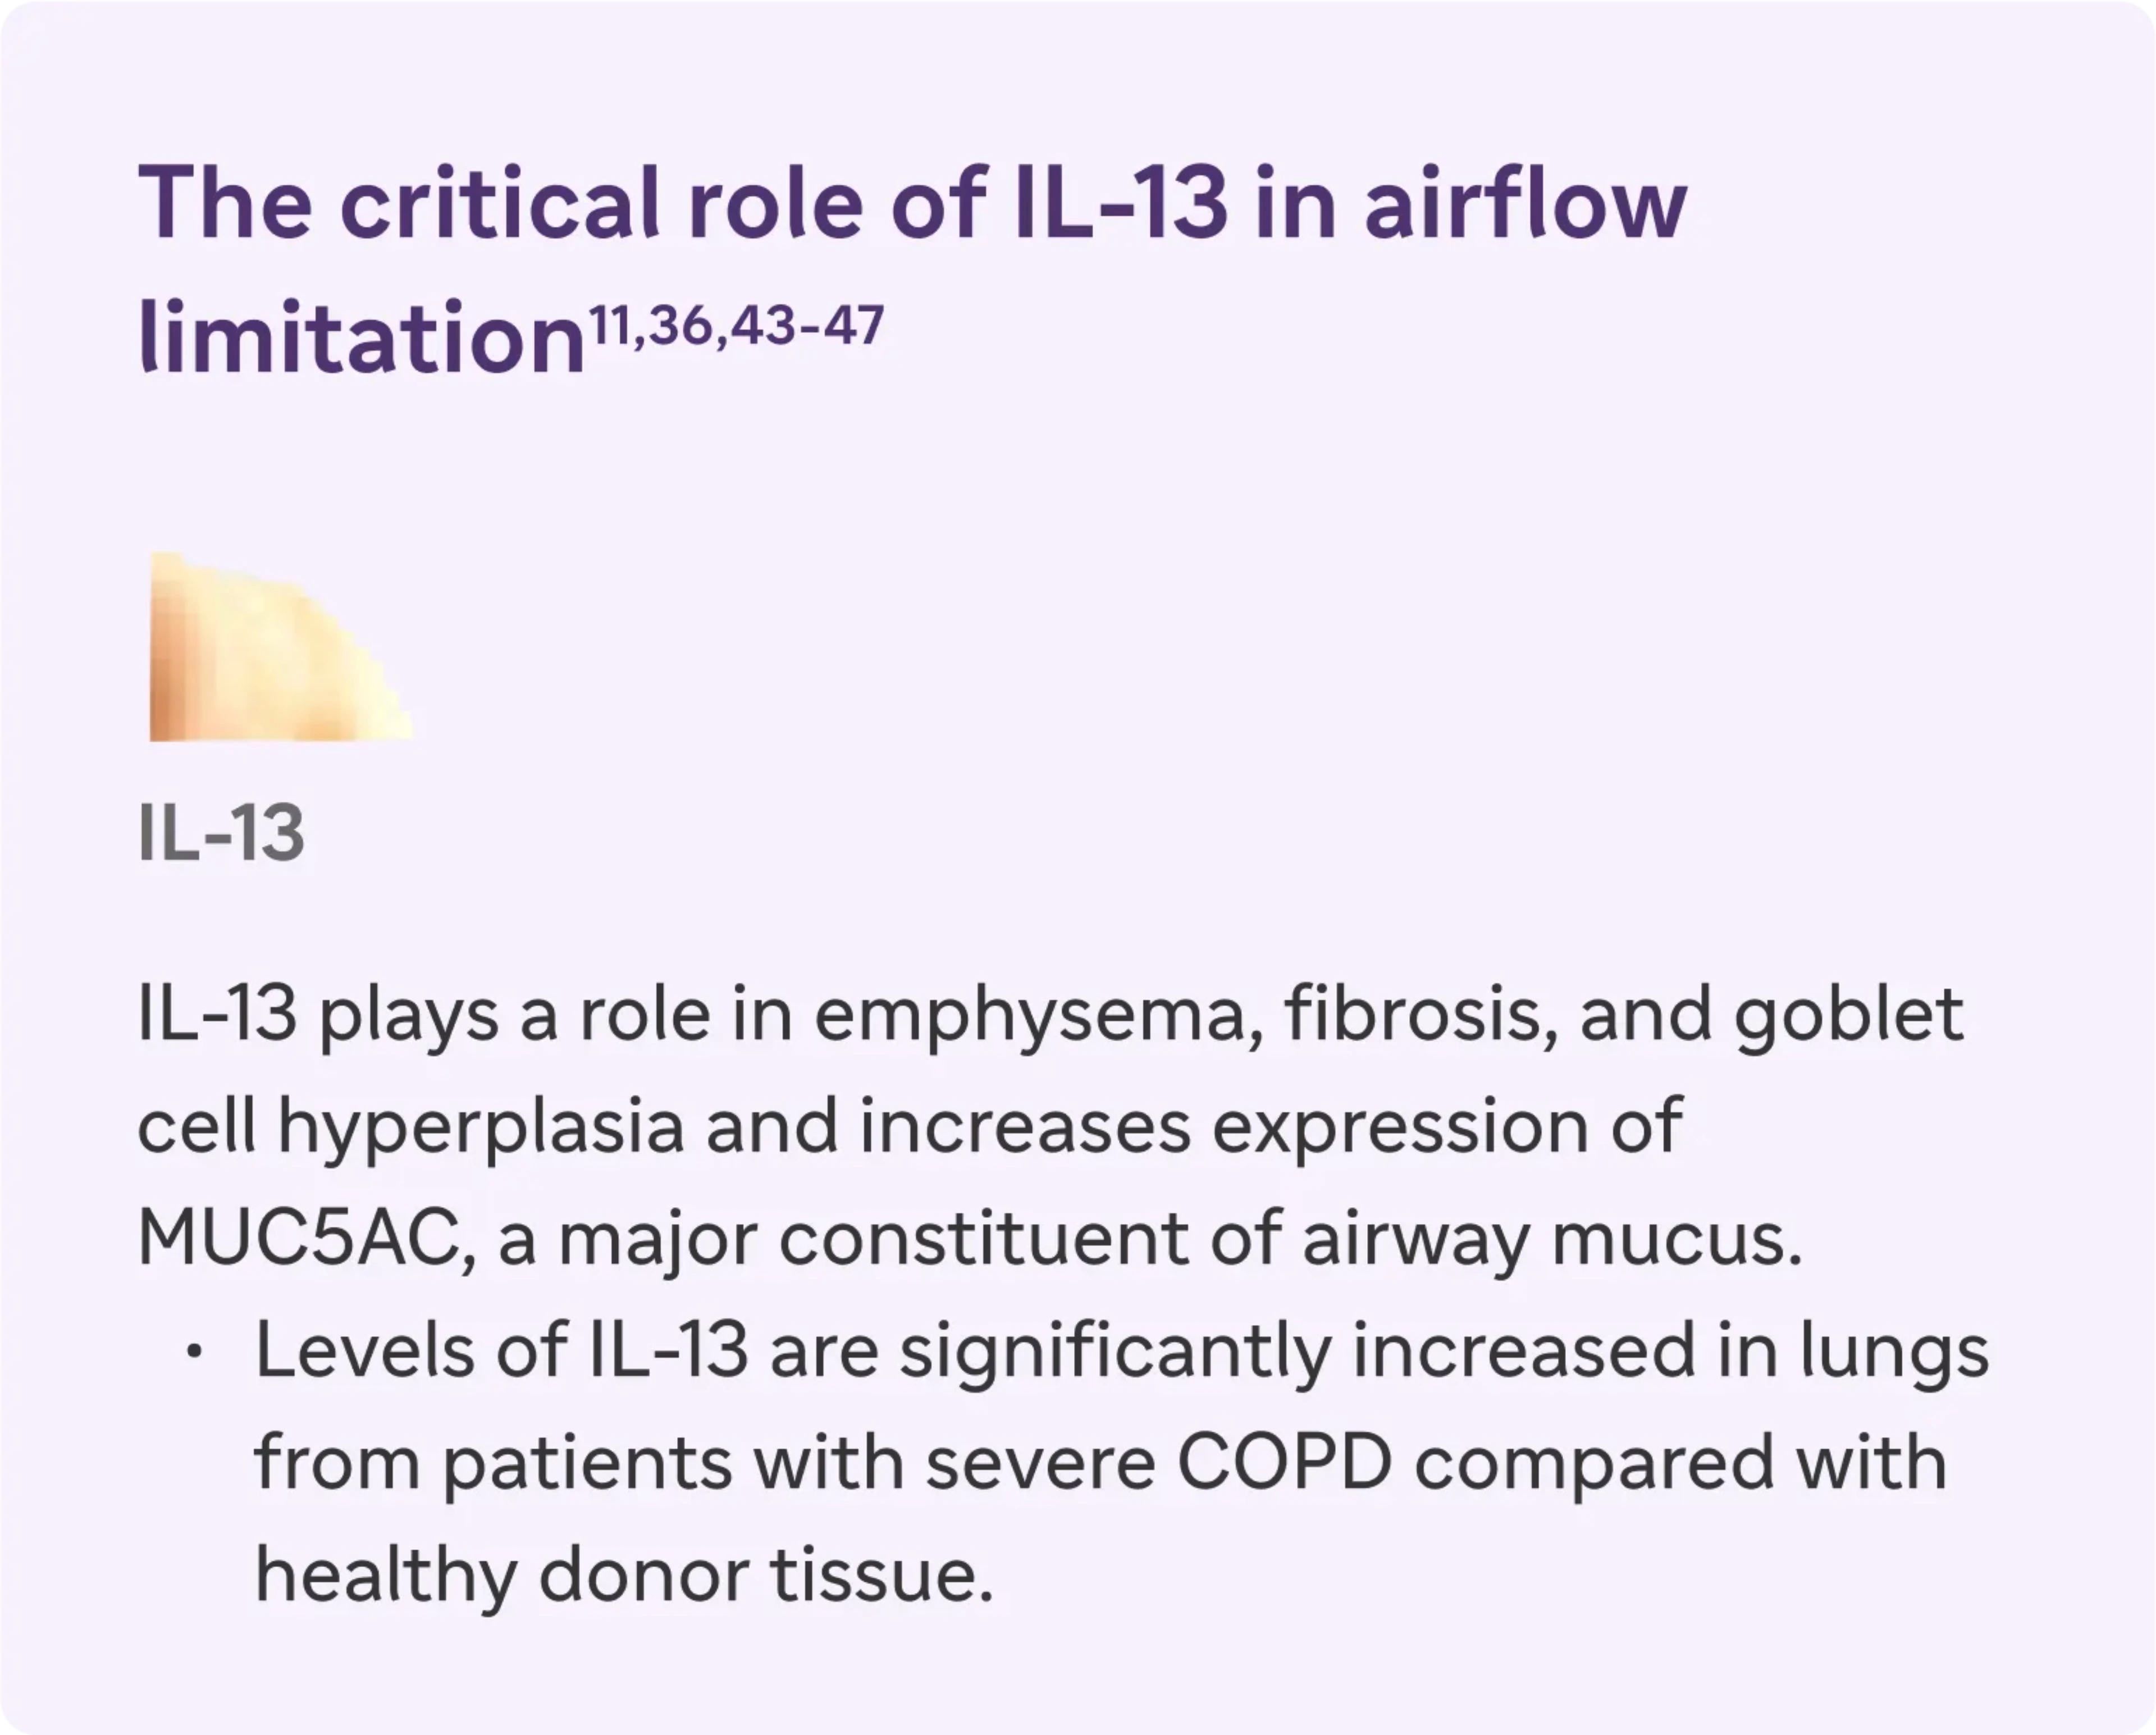 IL-13 plays a role in emphysema, fibrosis, and goblet cell hyperplasia and increases expression of MUC5AC